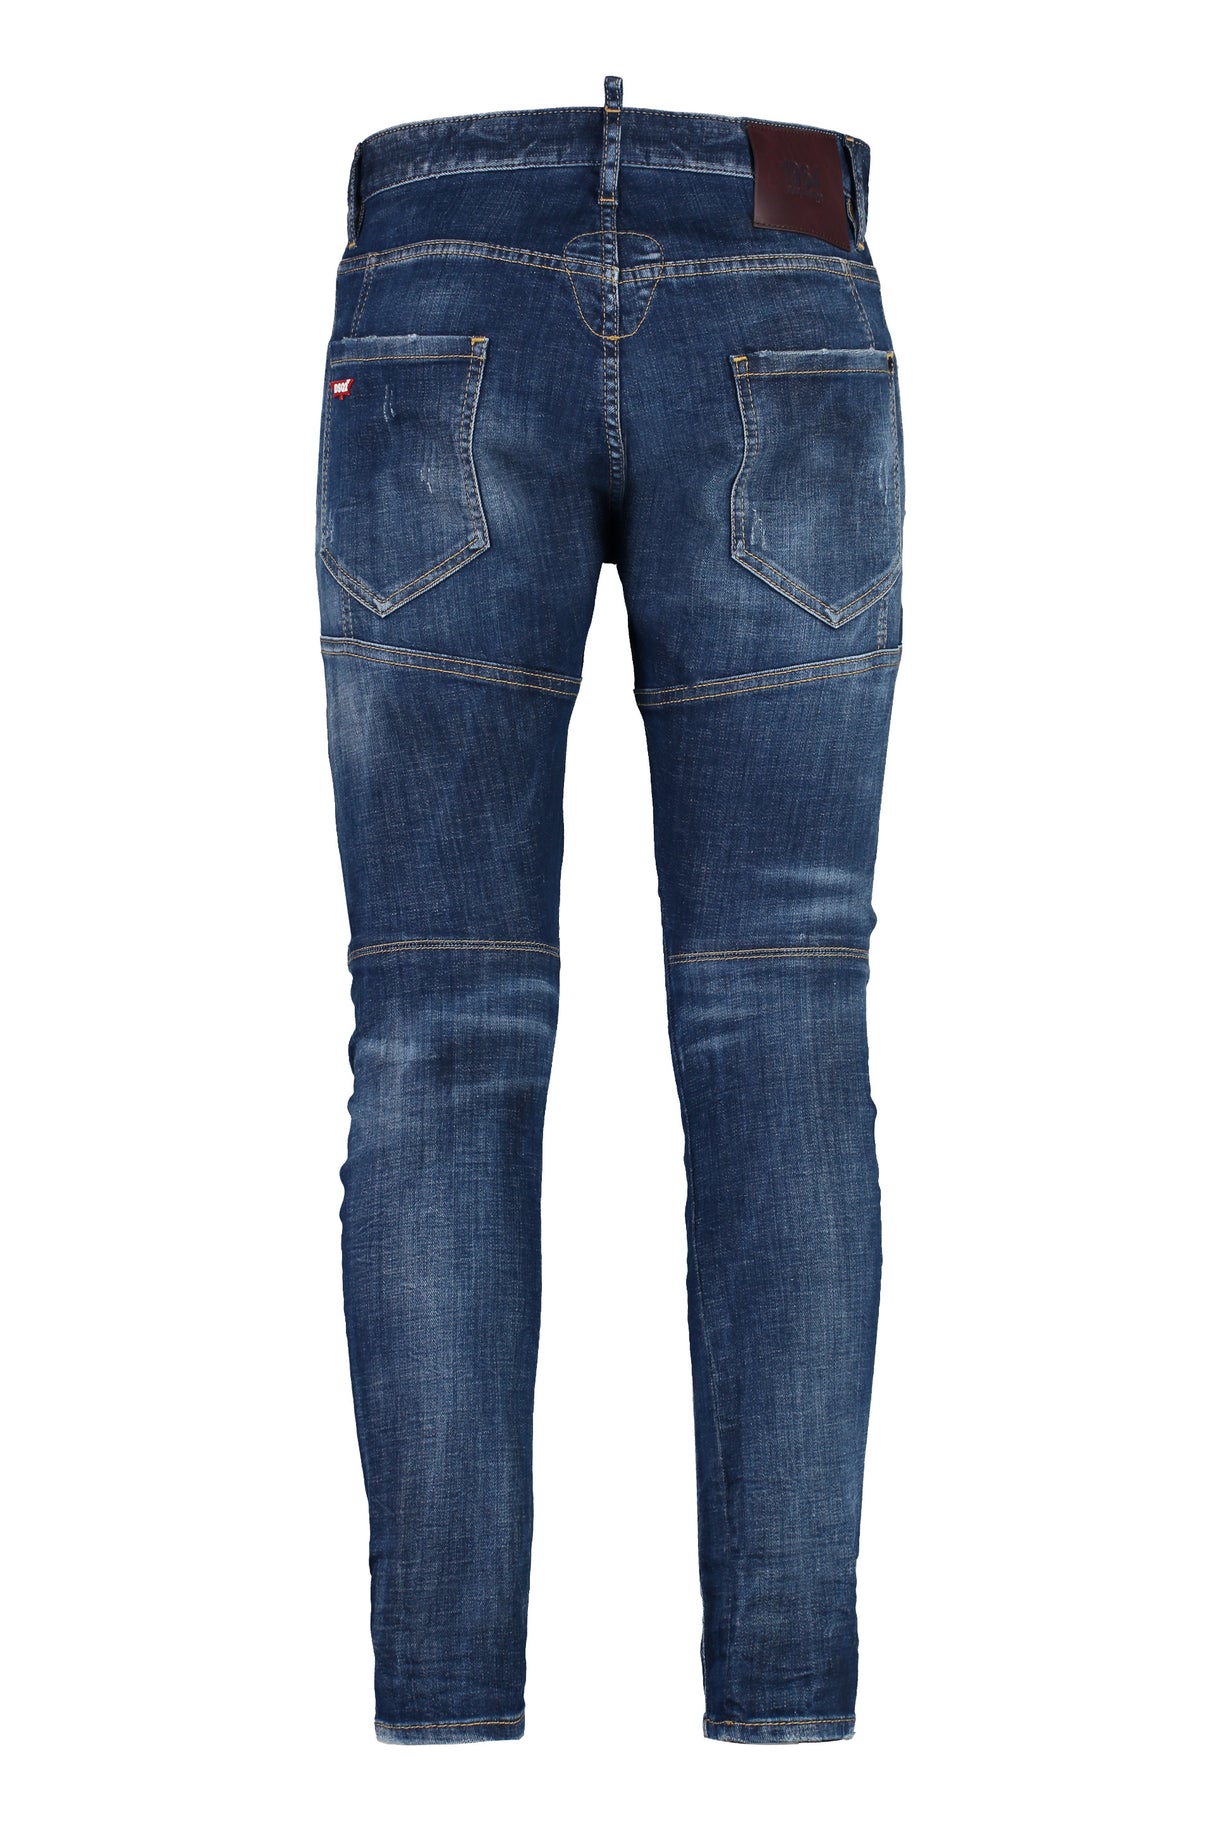 DSQUARED2 Men's Blue Distressed Jeans with Contrast Stitching and Leather Logo Patch